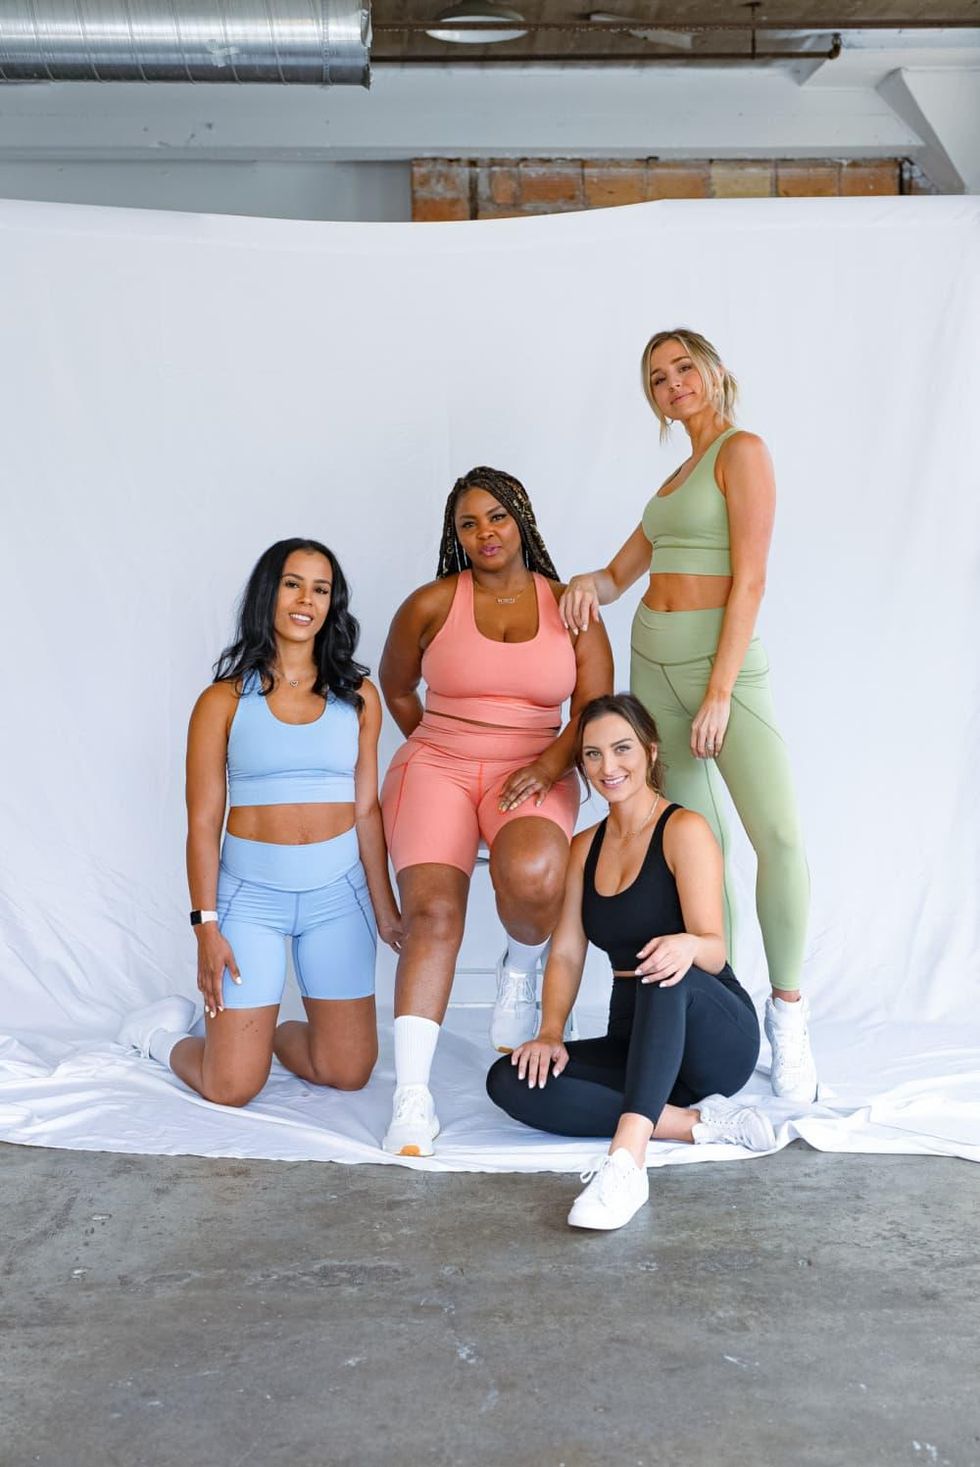 Dallas designer launches uplifting swimwear for women with itty bitty fit  issue - CultureMap Dallas